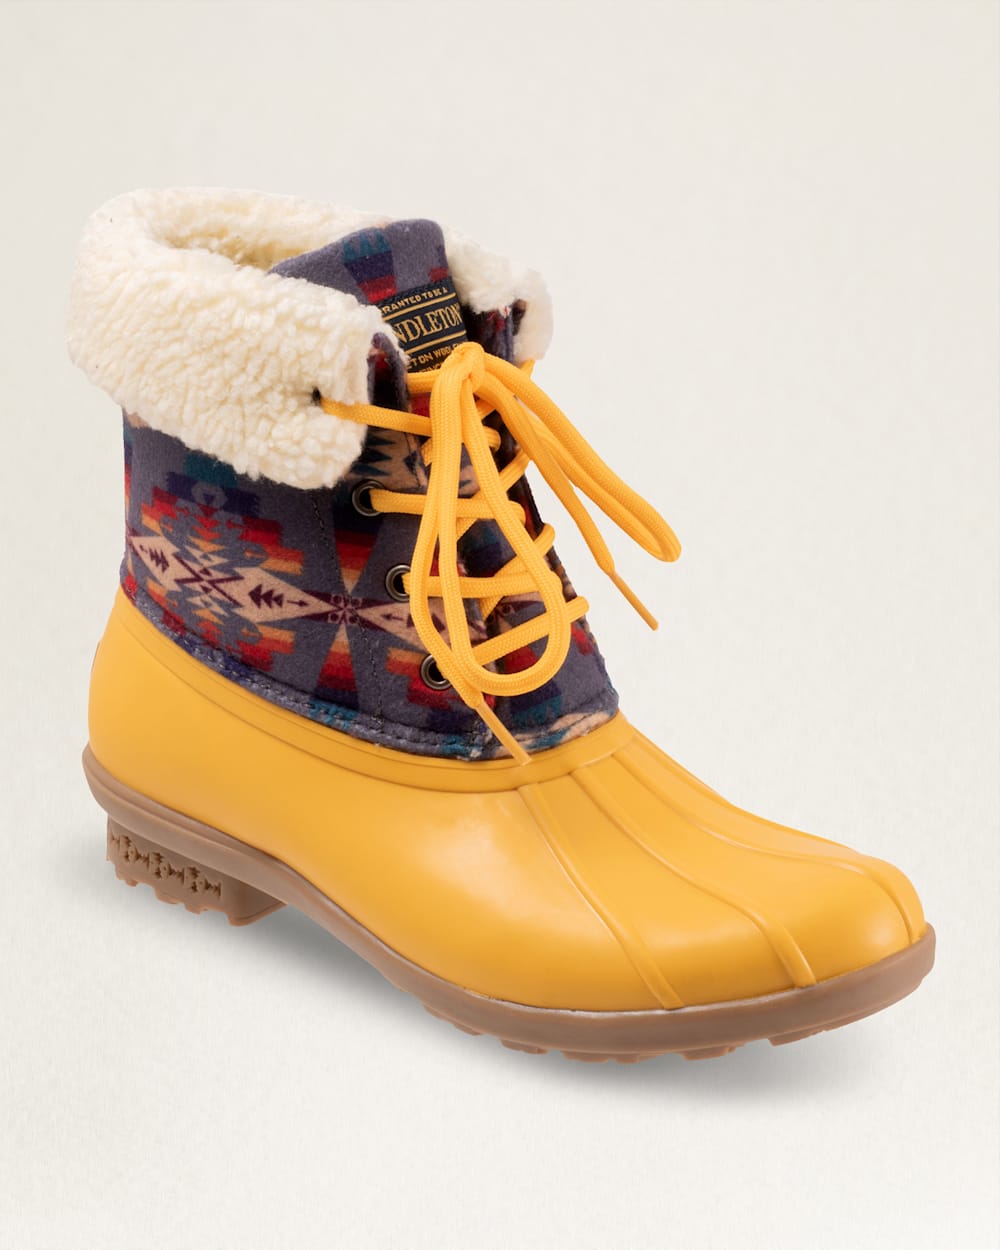 ALTERNATE VIEW OF WOMENS TUCSON DUCK MID BOOT IN YELLOW image number 6